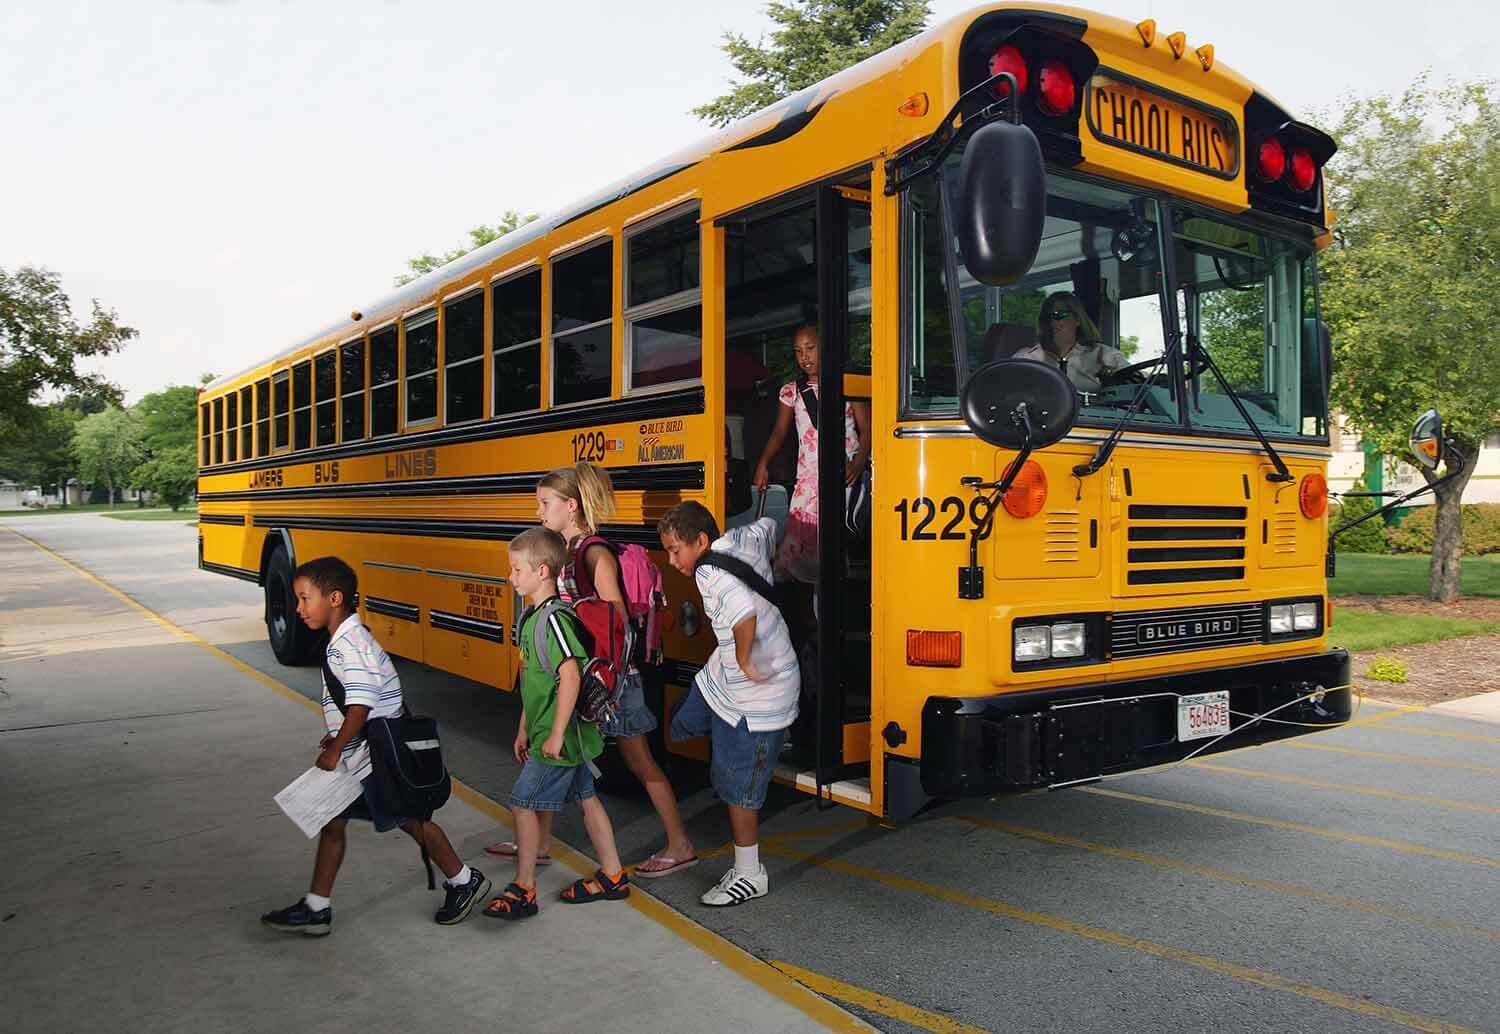 Lamers Bus Lines, Inc. school bus dropping off children